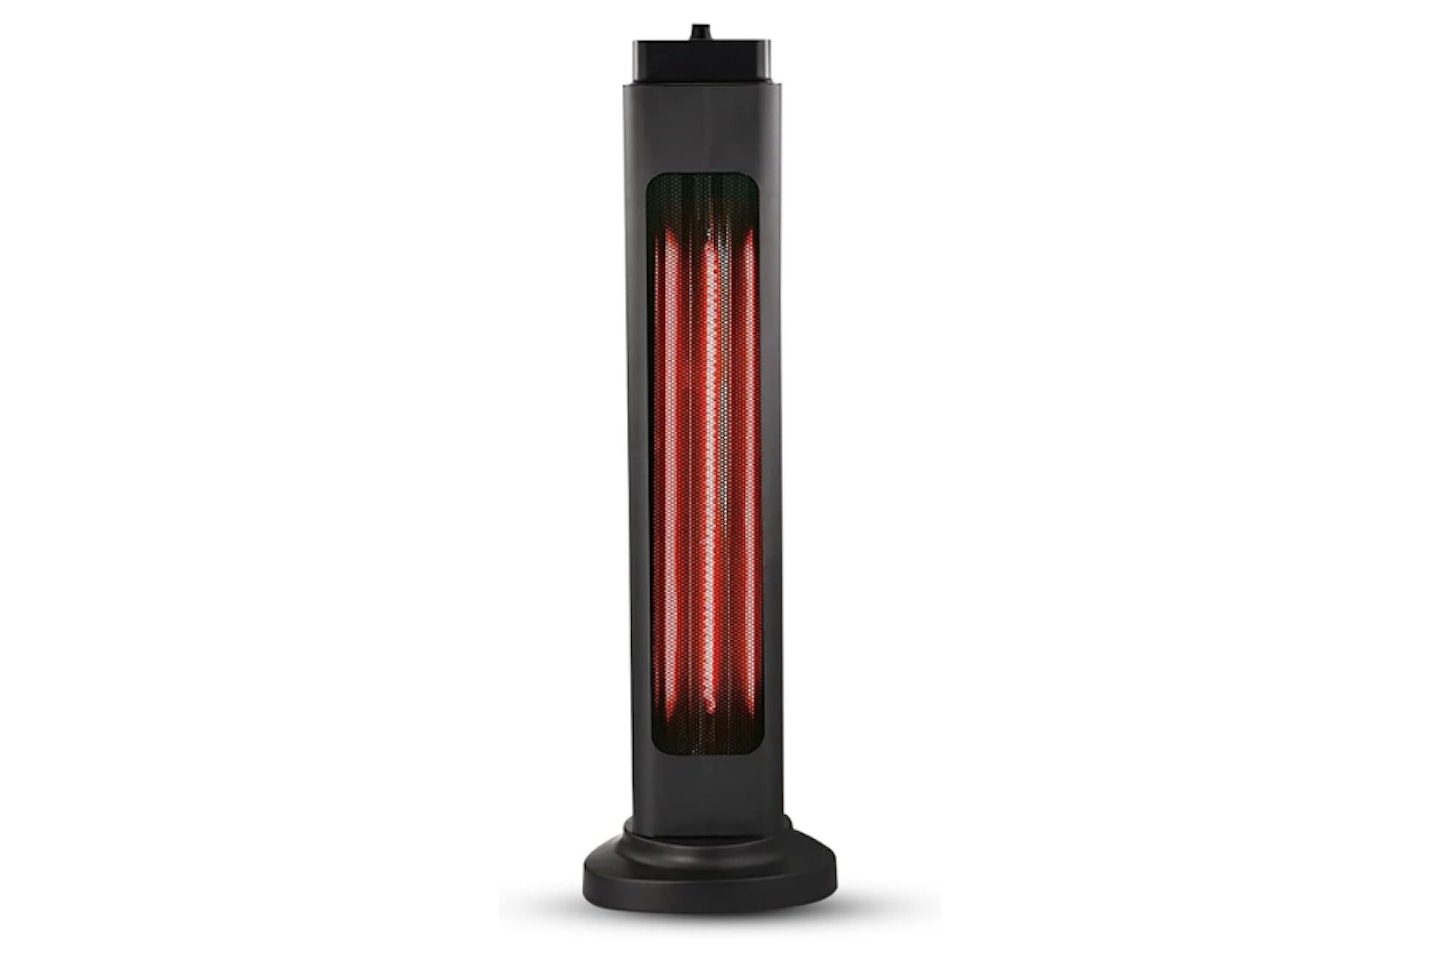 ENERJ Portable Infrared Heater, 600W & 1200W Infrared Heater